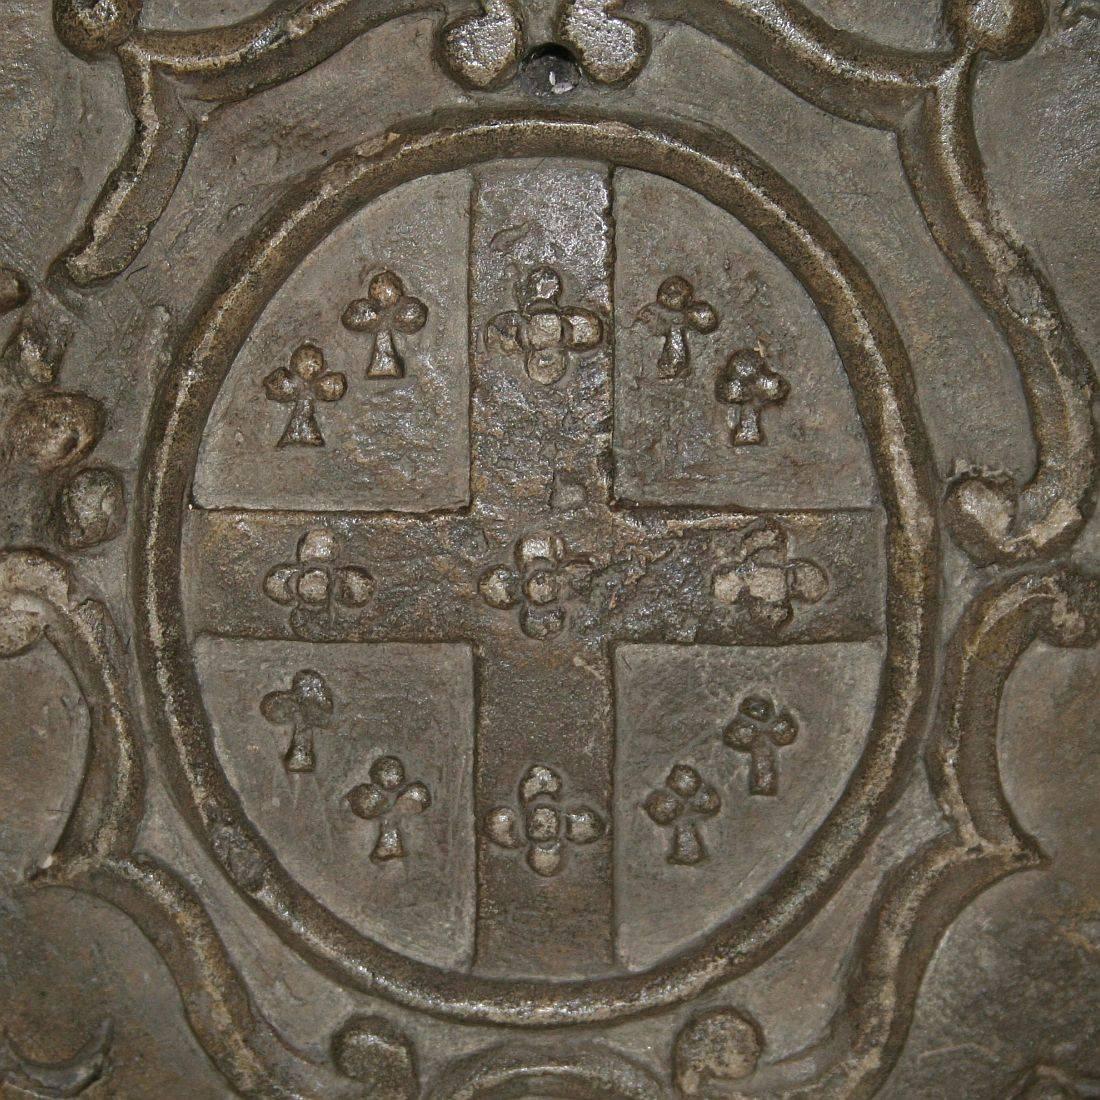 Beautiful keystone with a coat of arms. Dated 1755 and ornated with fleurs-de-lyse
France, 1755
Weathered.